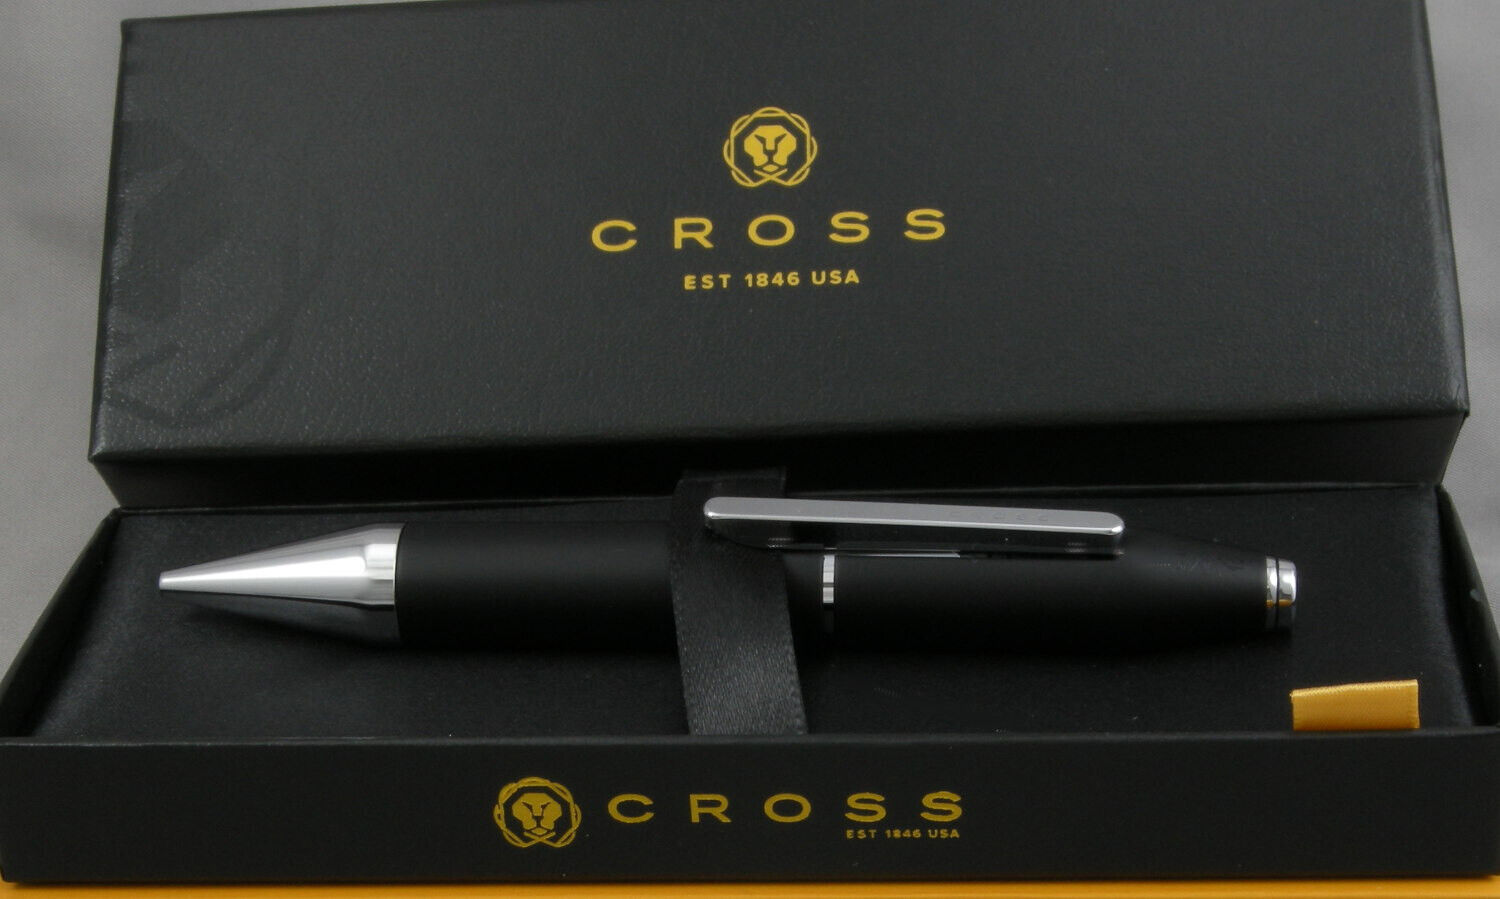 Cross X-series Charcoal Black & Chrome Rollerball Pen - New In Box - At0725-1